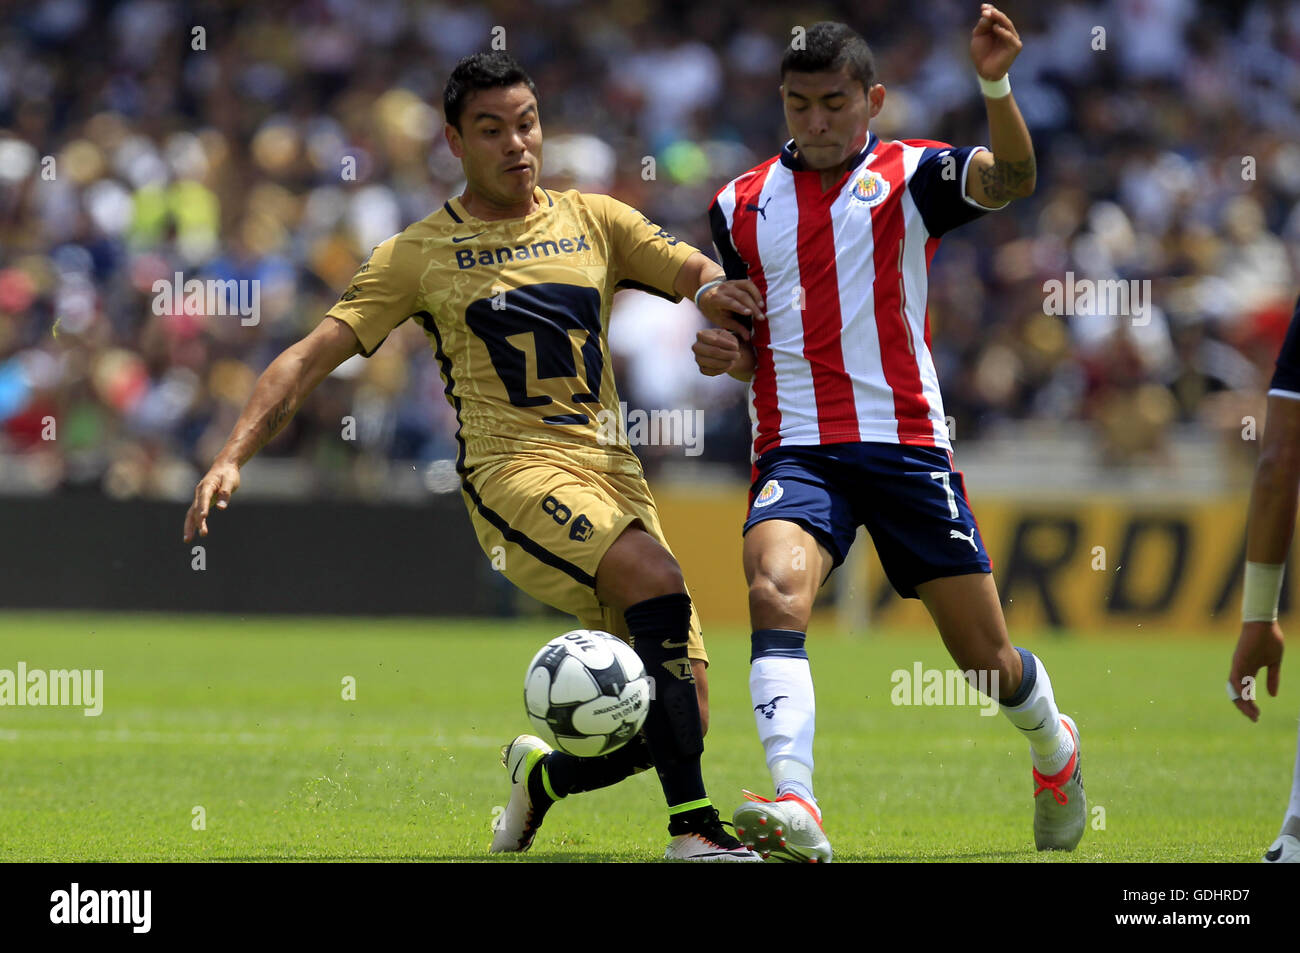 Mexico City, Mexico. 17th July, 2016. Pablo Barrera (L) of UNAM Pumas vies  with Orbelin Pineda of Guadalajara Chivas during their Mexico Primera  Division Apertura match at the Olympic University Stadium in